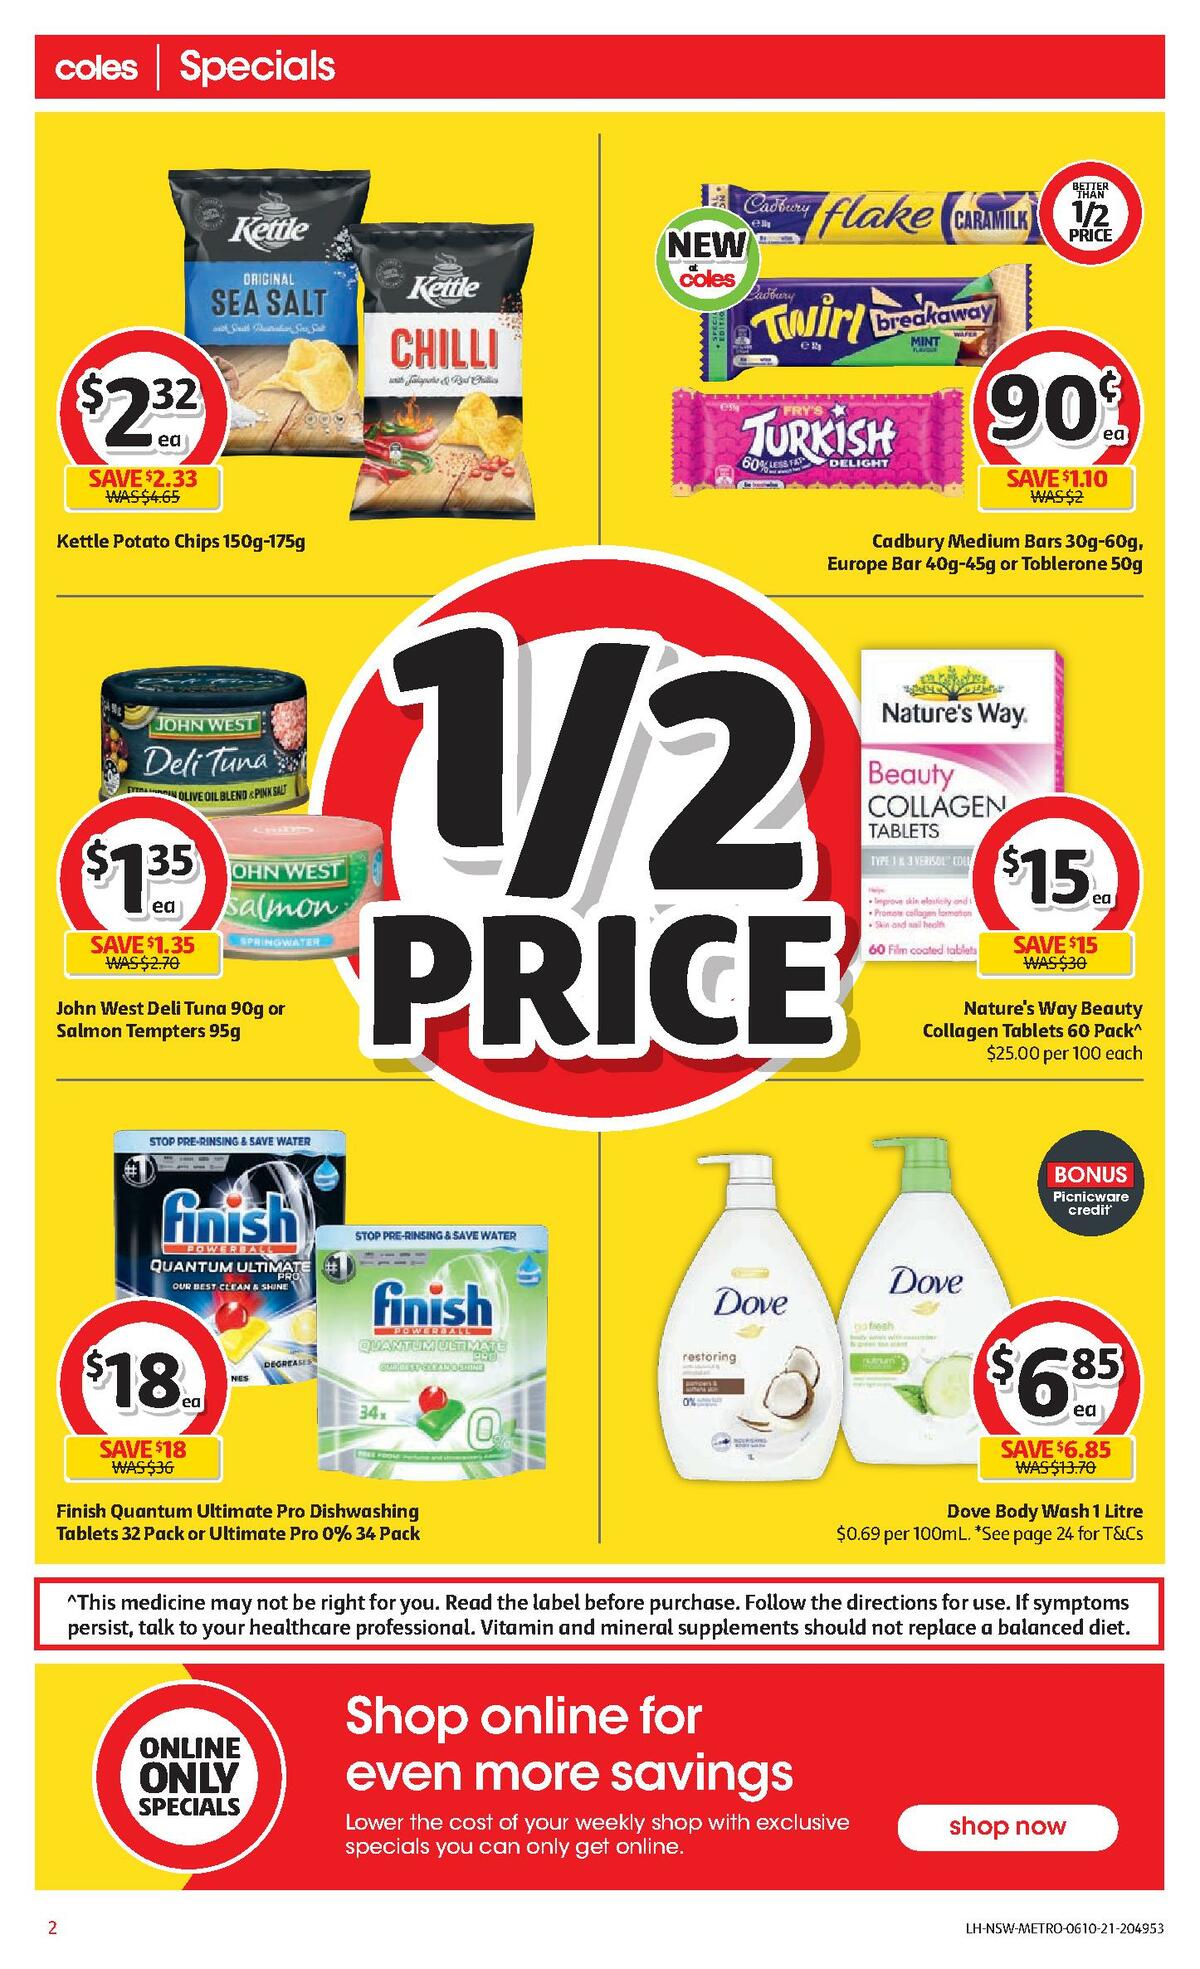 Coles Catalogues from 6 October